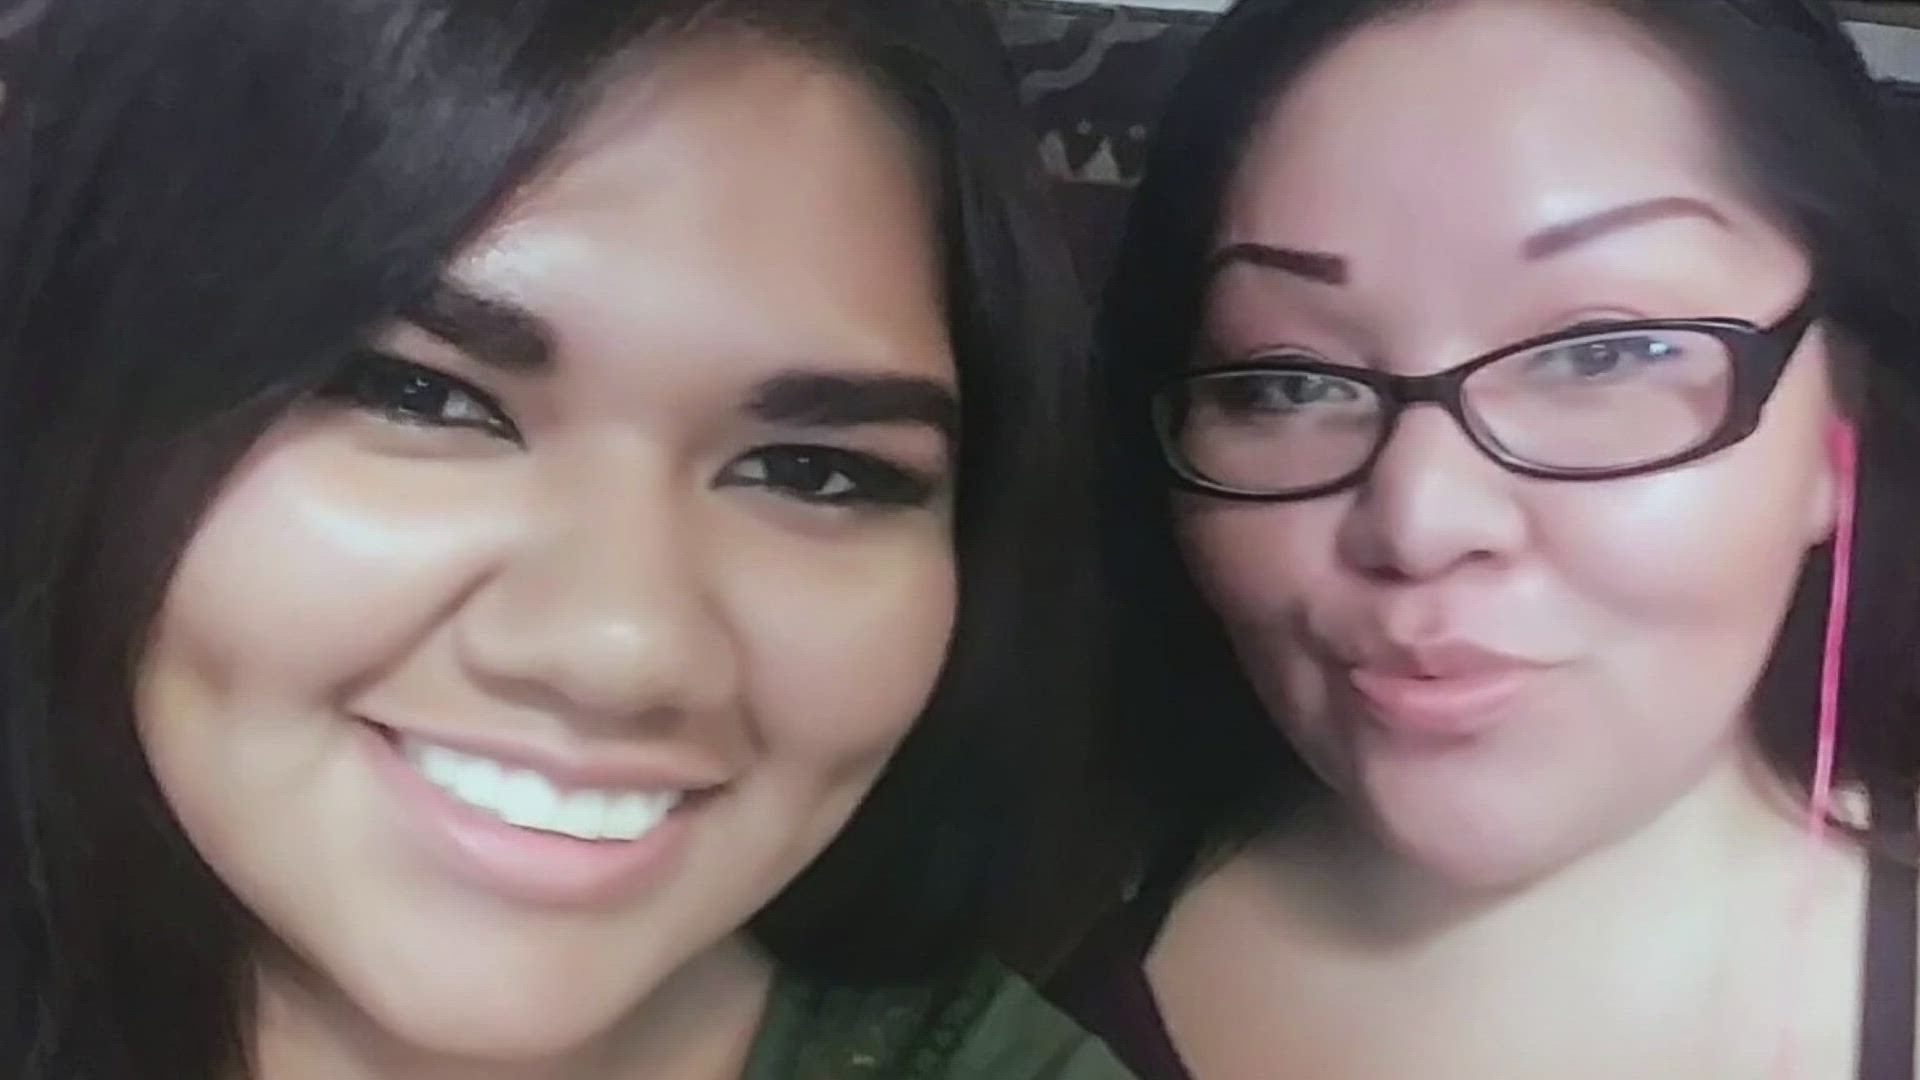 Aaliyah Lozano was working overnight at Bosa Donuts in Mesa when she was shot on April 2. Her family says she's now paralyzed from the neck down.